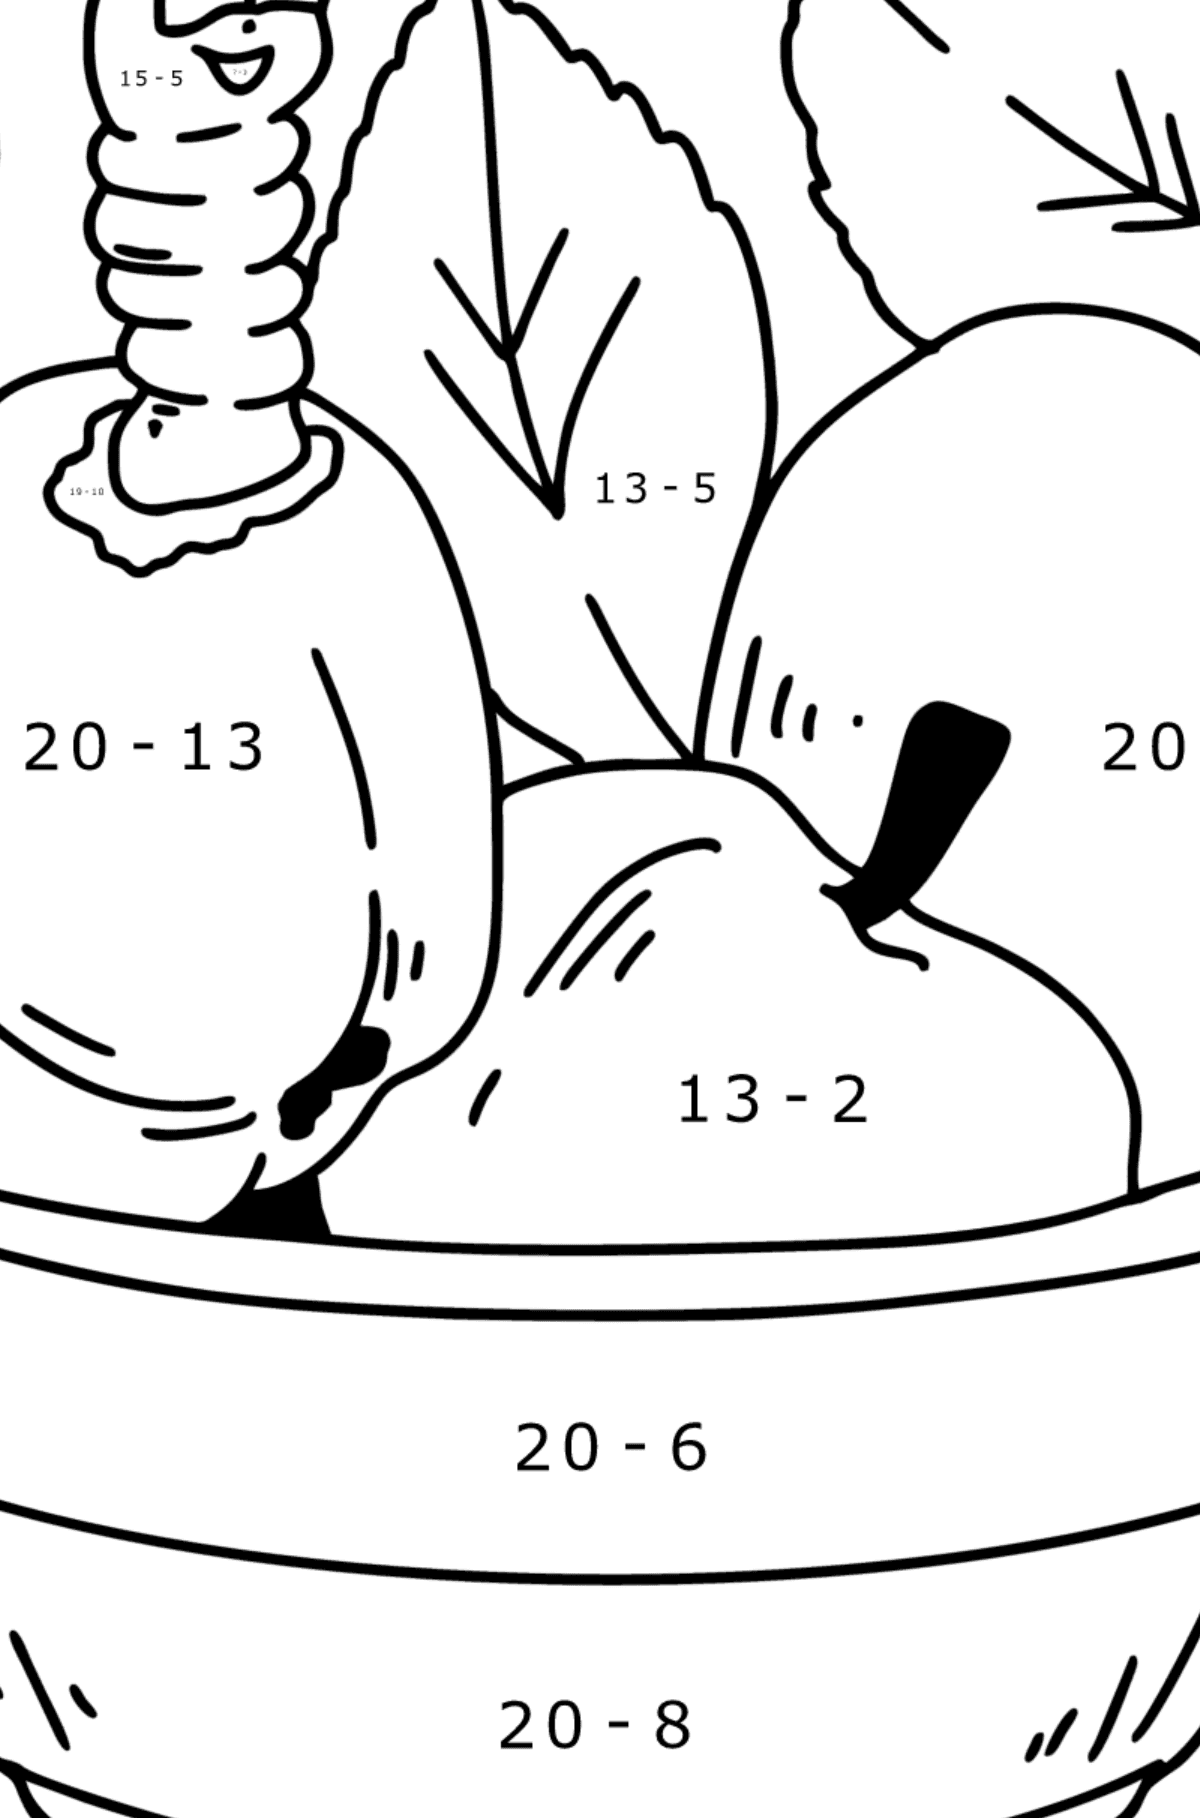 Coloring page Autumn - Apples and Сaterpillar - Math Coloring - Subtraction for Kids